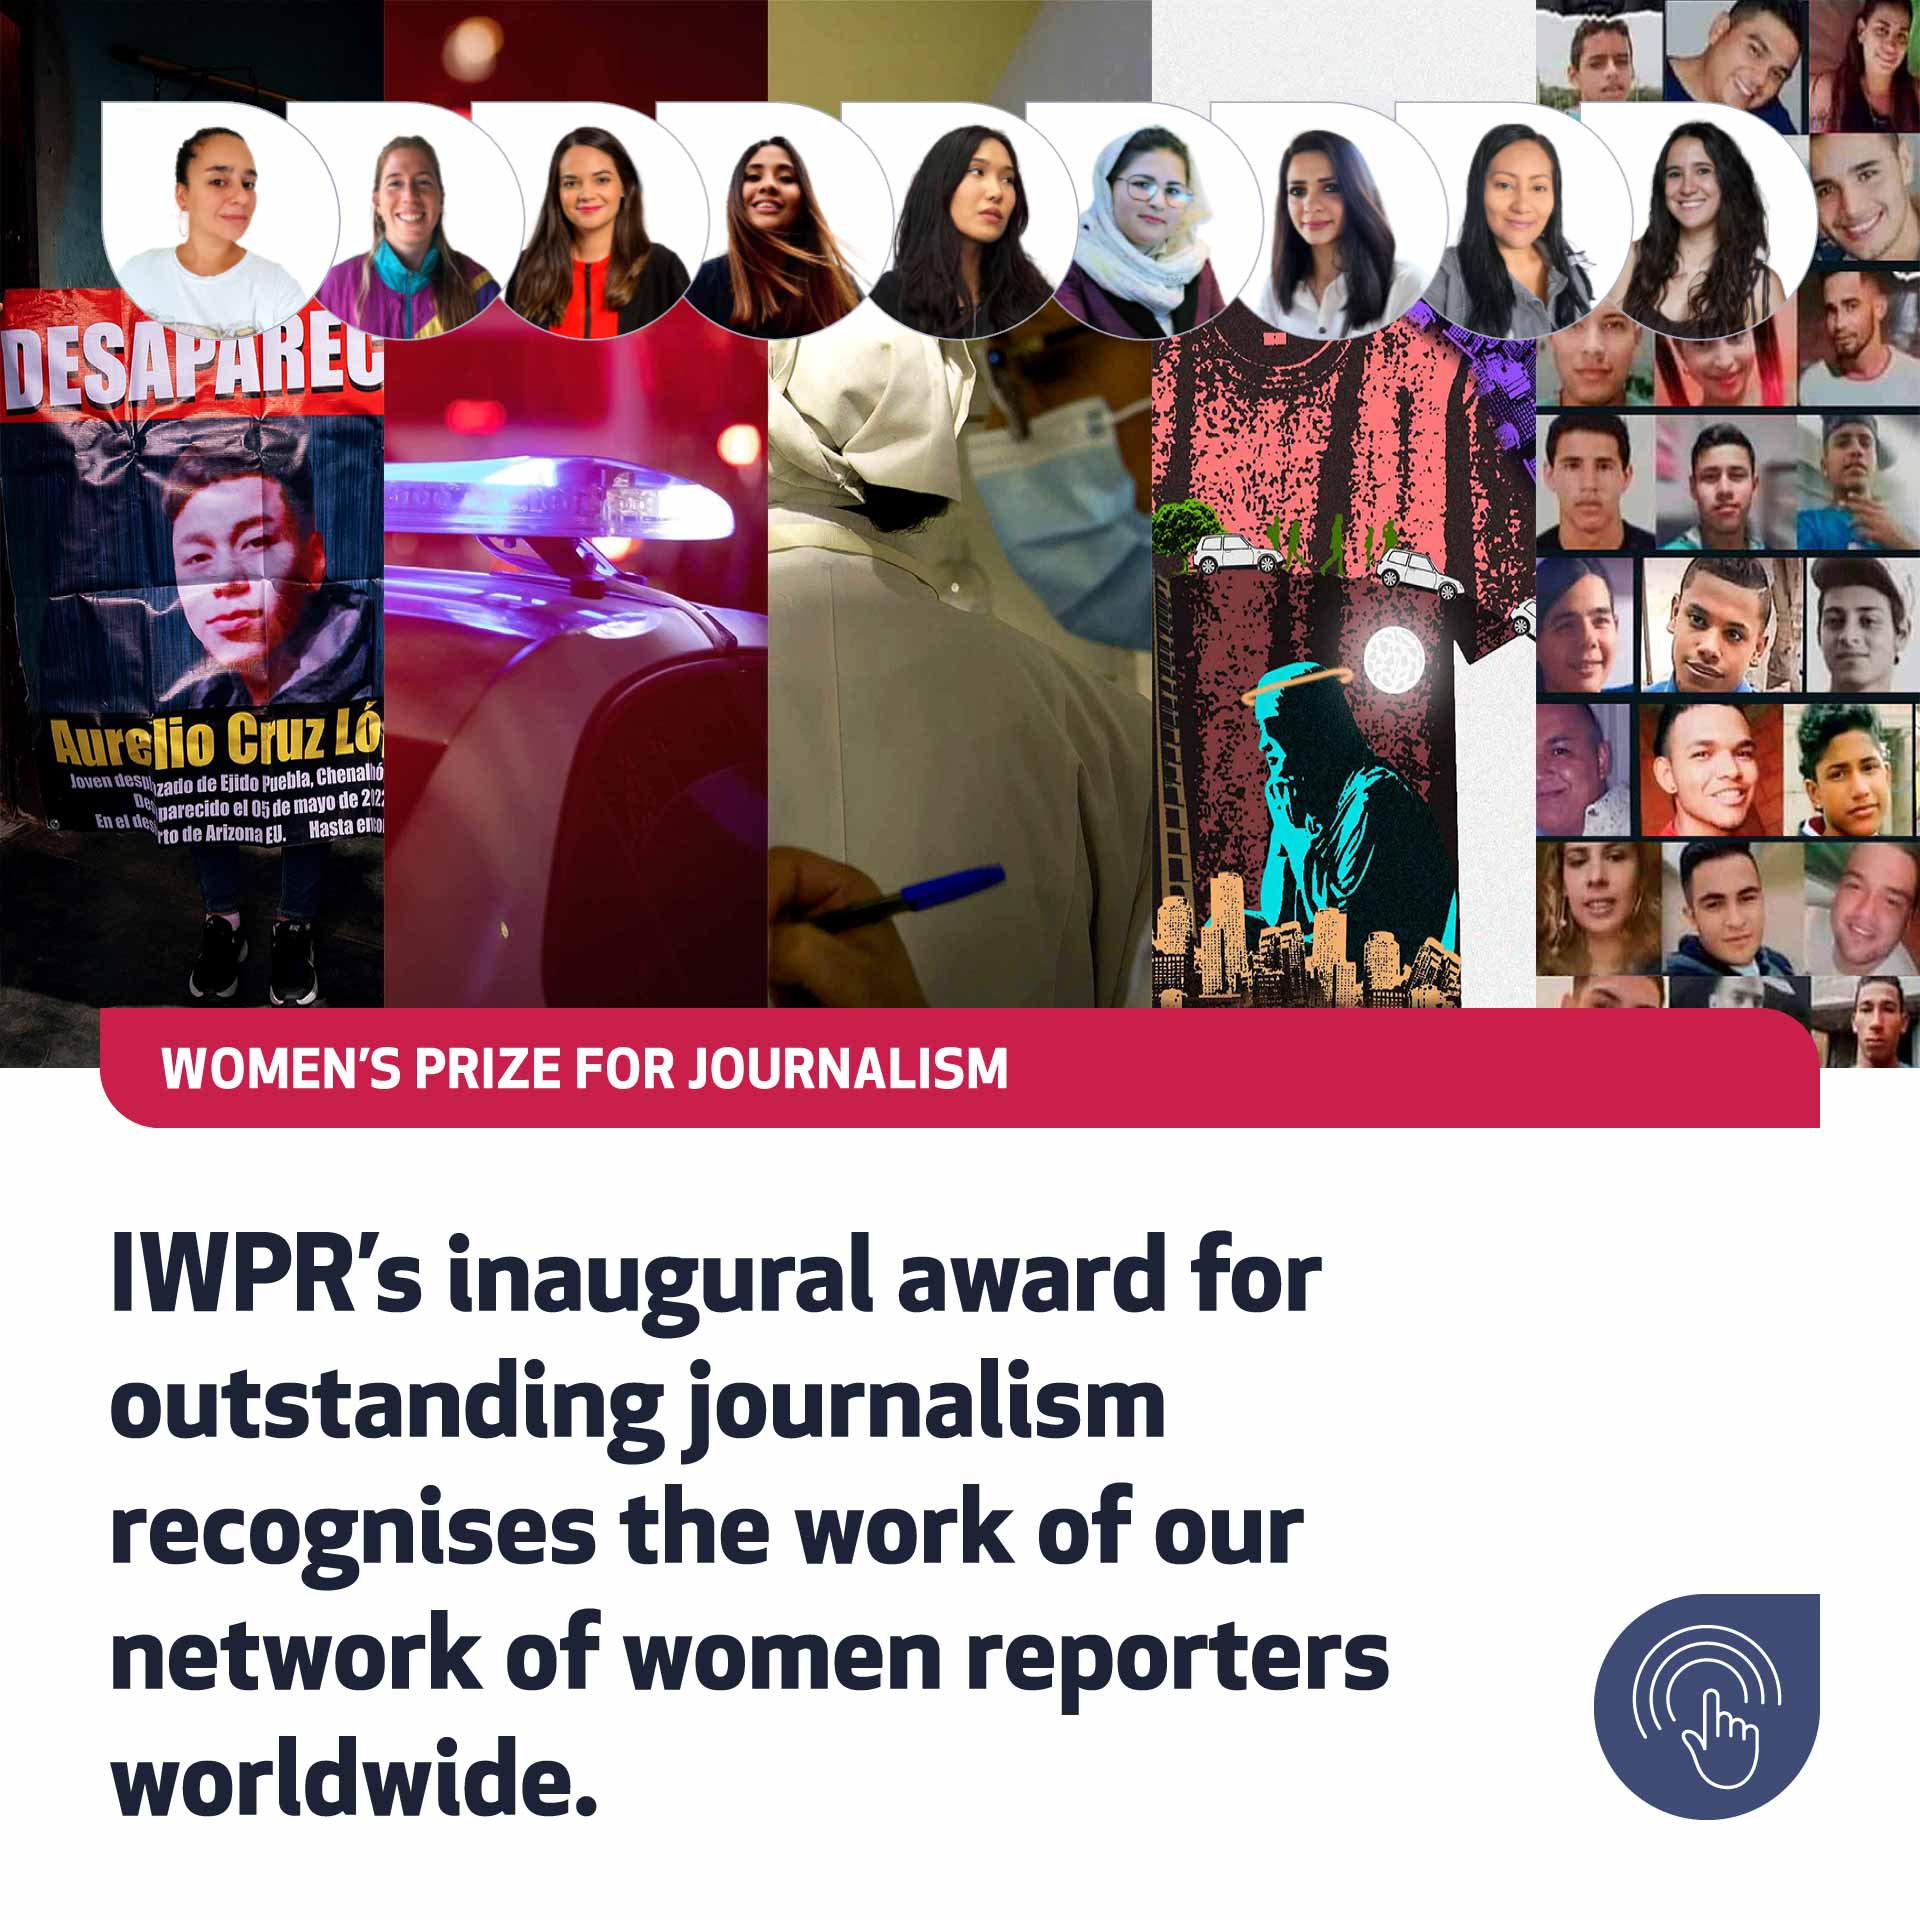 Women’s Prize for Journalism